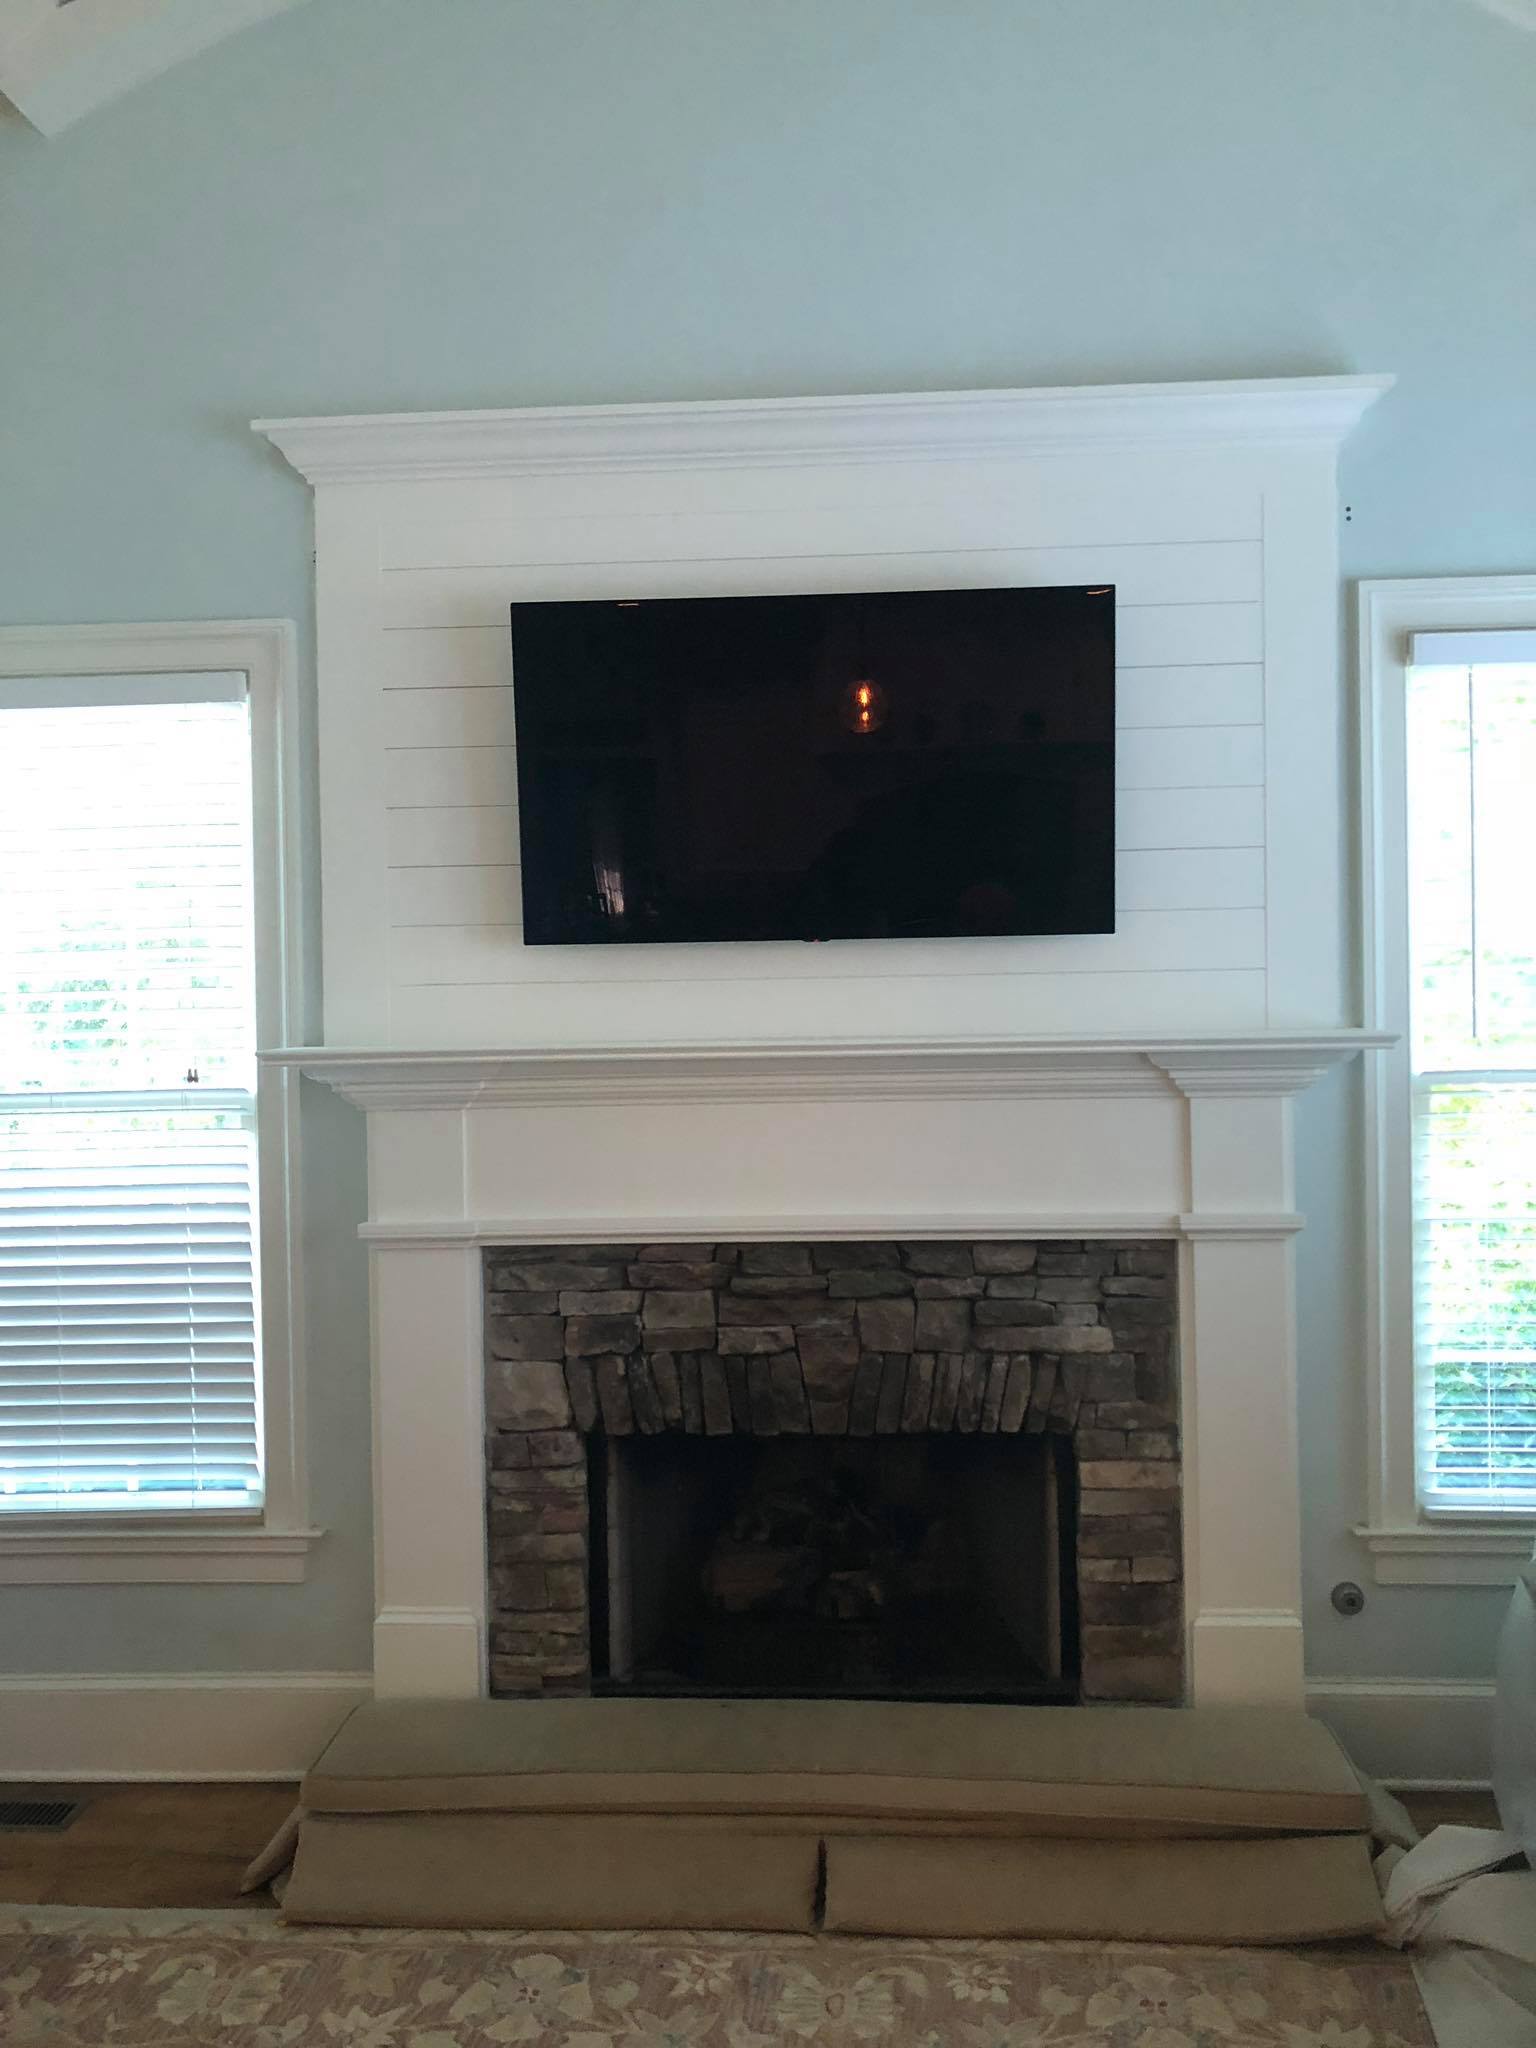 Fireplace Mantel and Trim Painted White 2